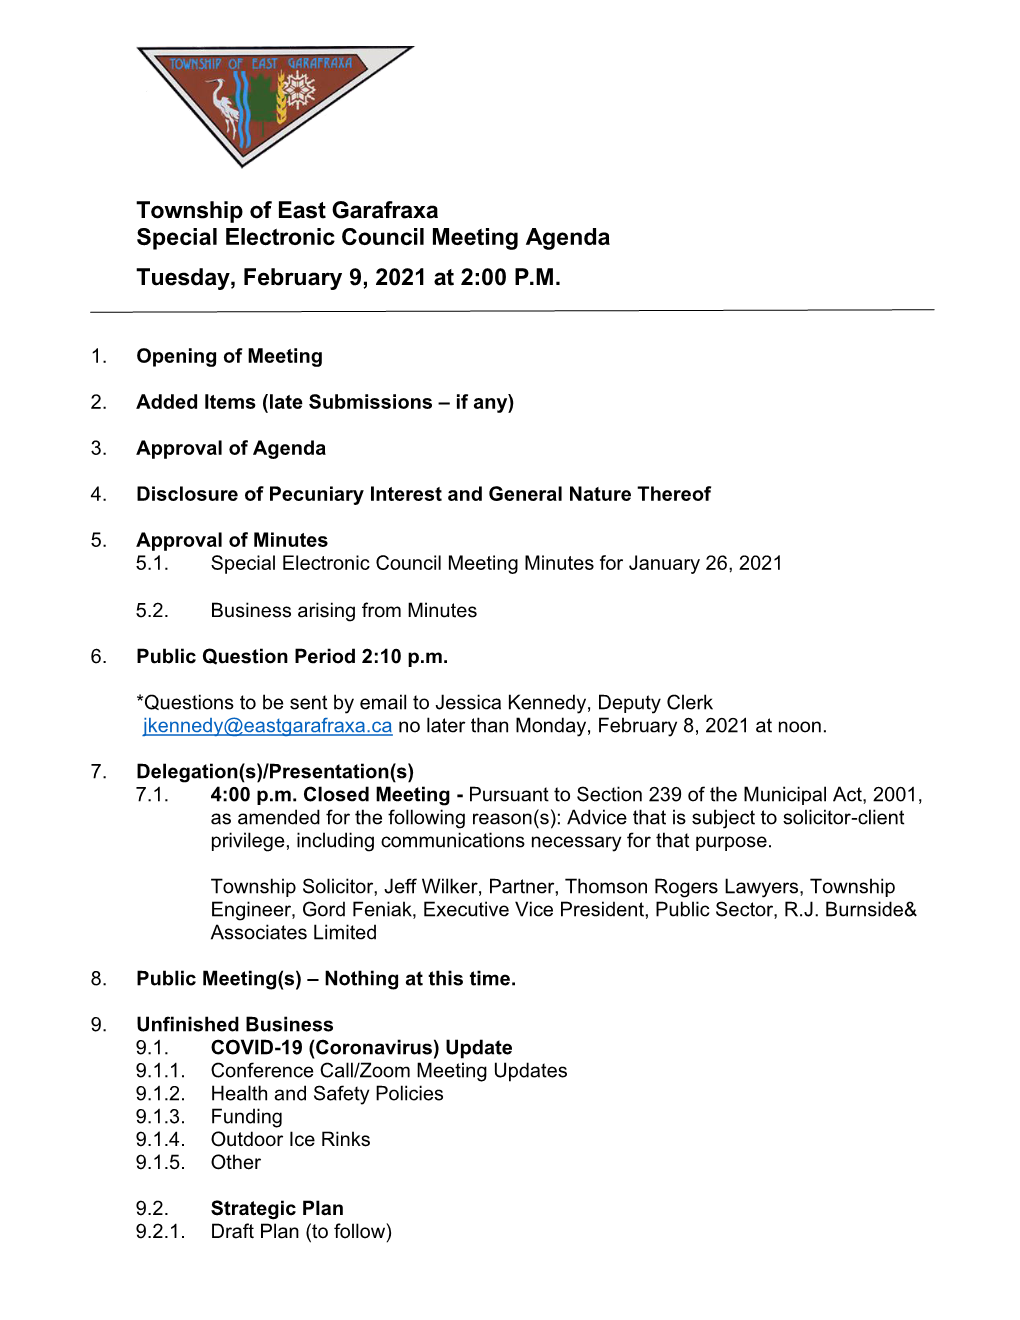 Township of East Garafraxa Special Electronic Council Meeting Agenda Tuesday, February 9, 2021 at 2:00 P.M